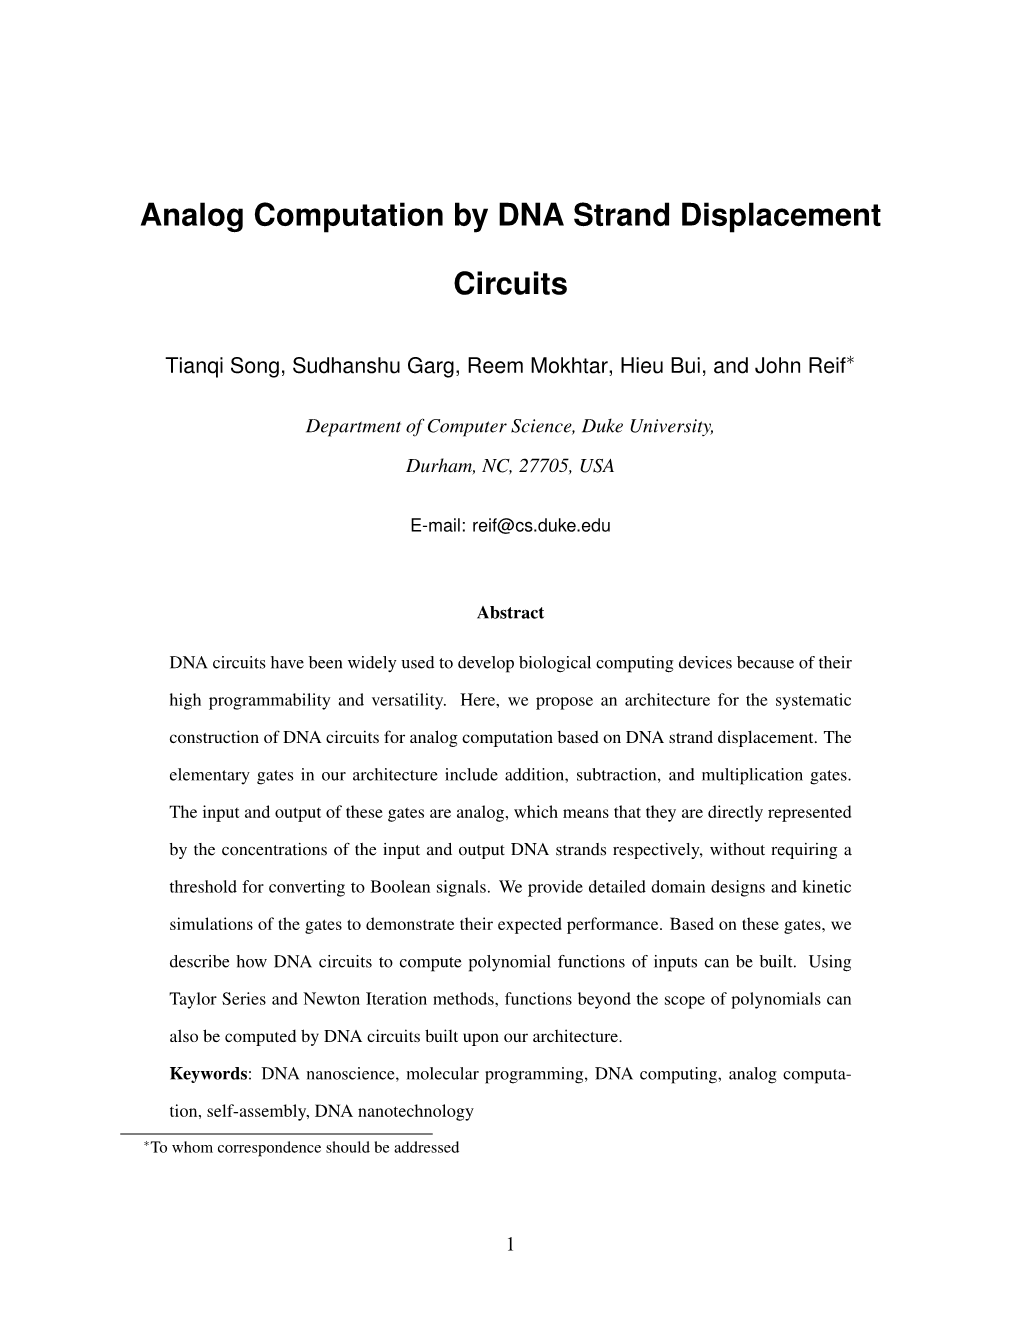 Analog Computation by DNA Strand Displacement Circuits